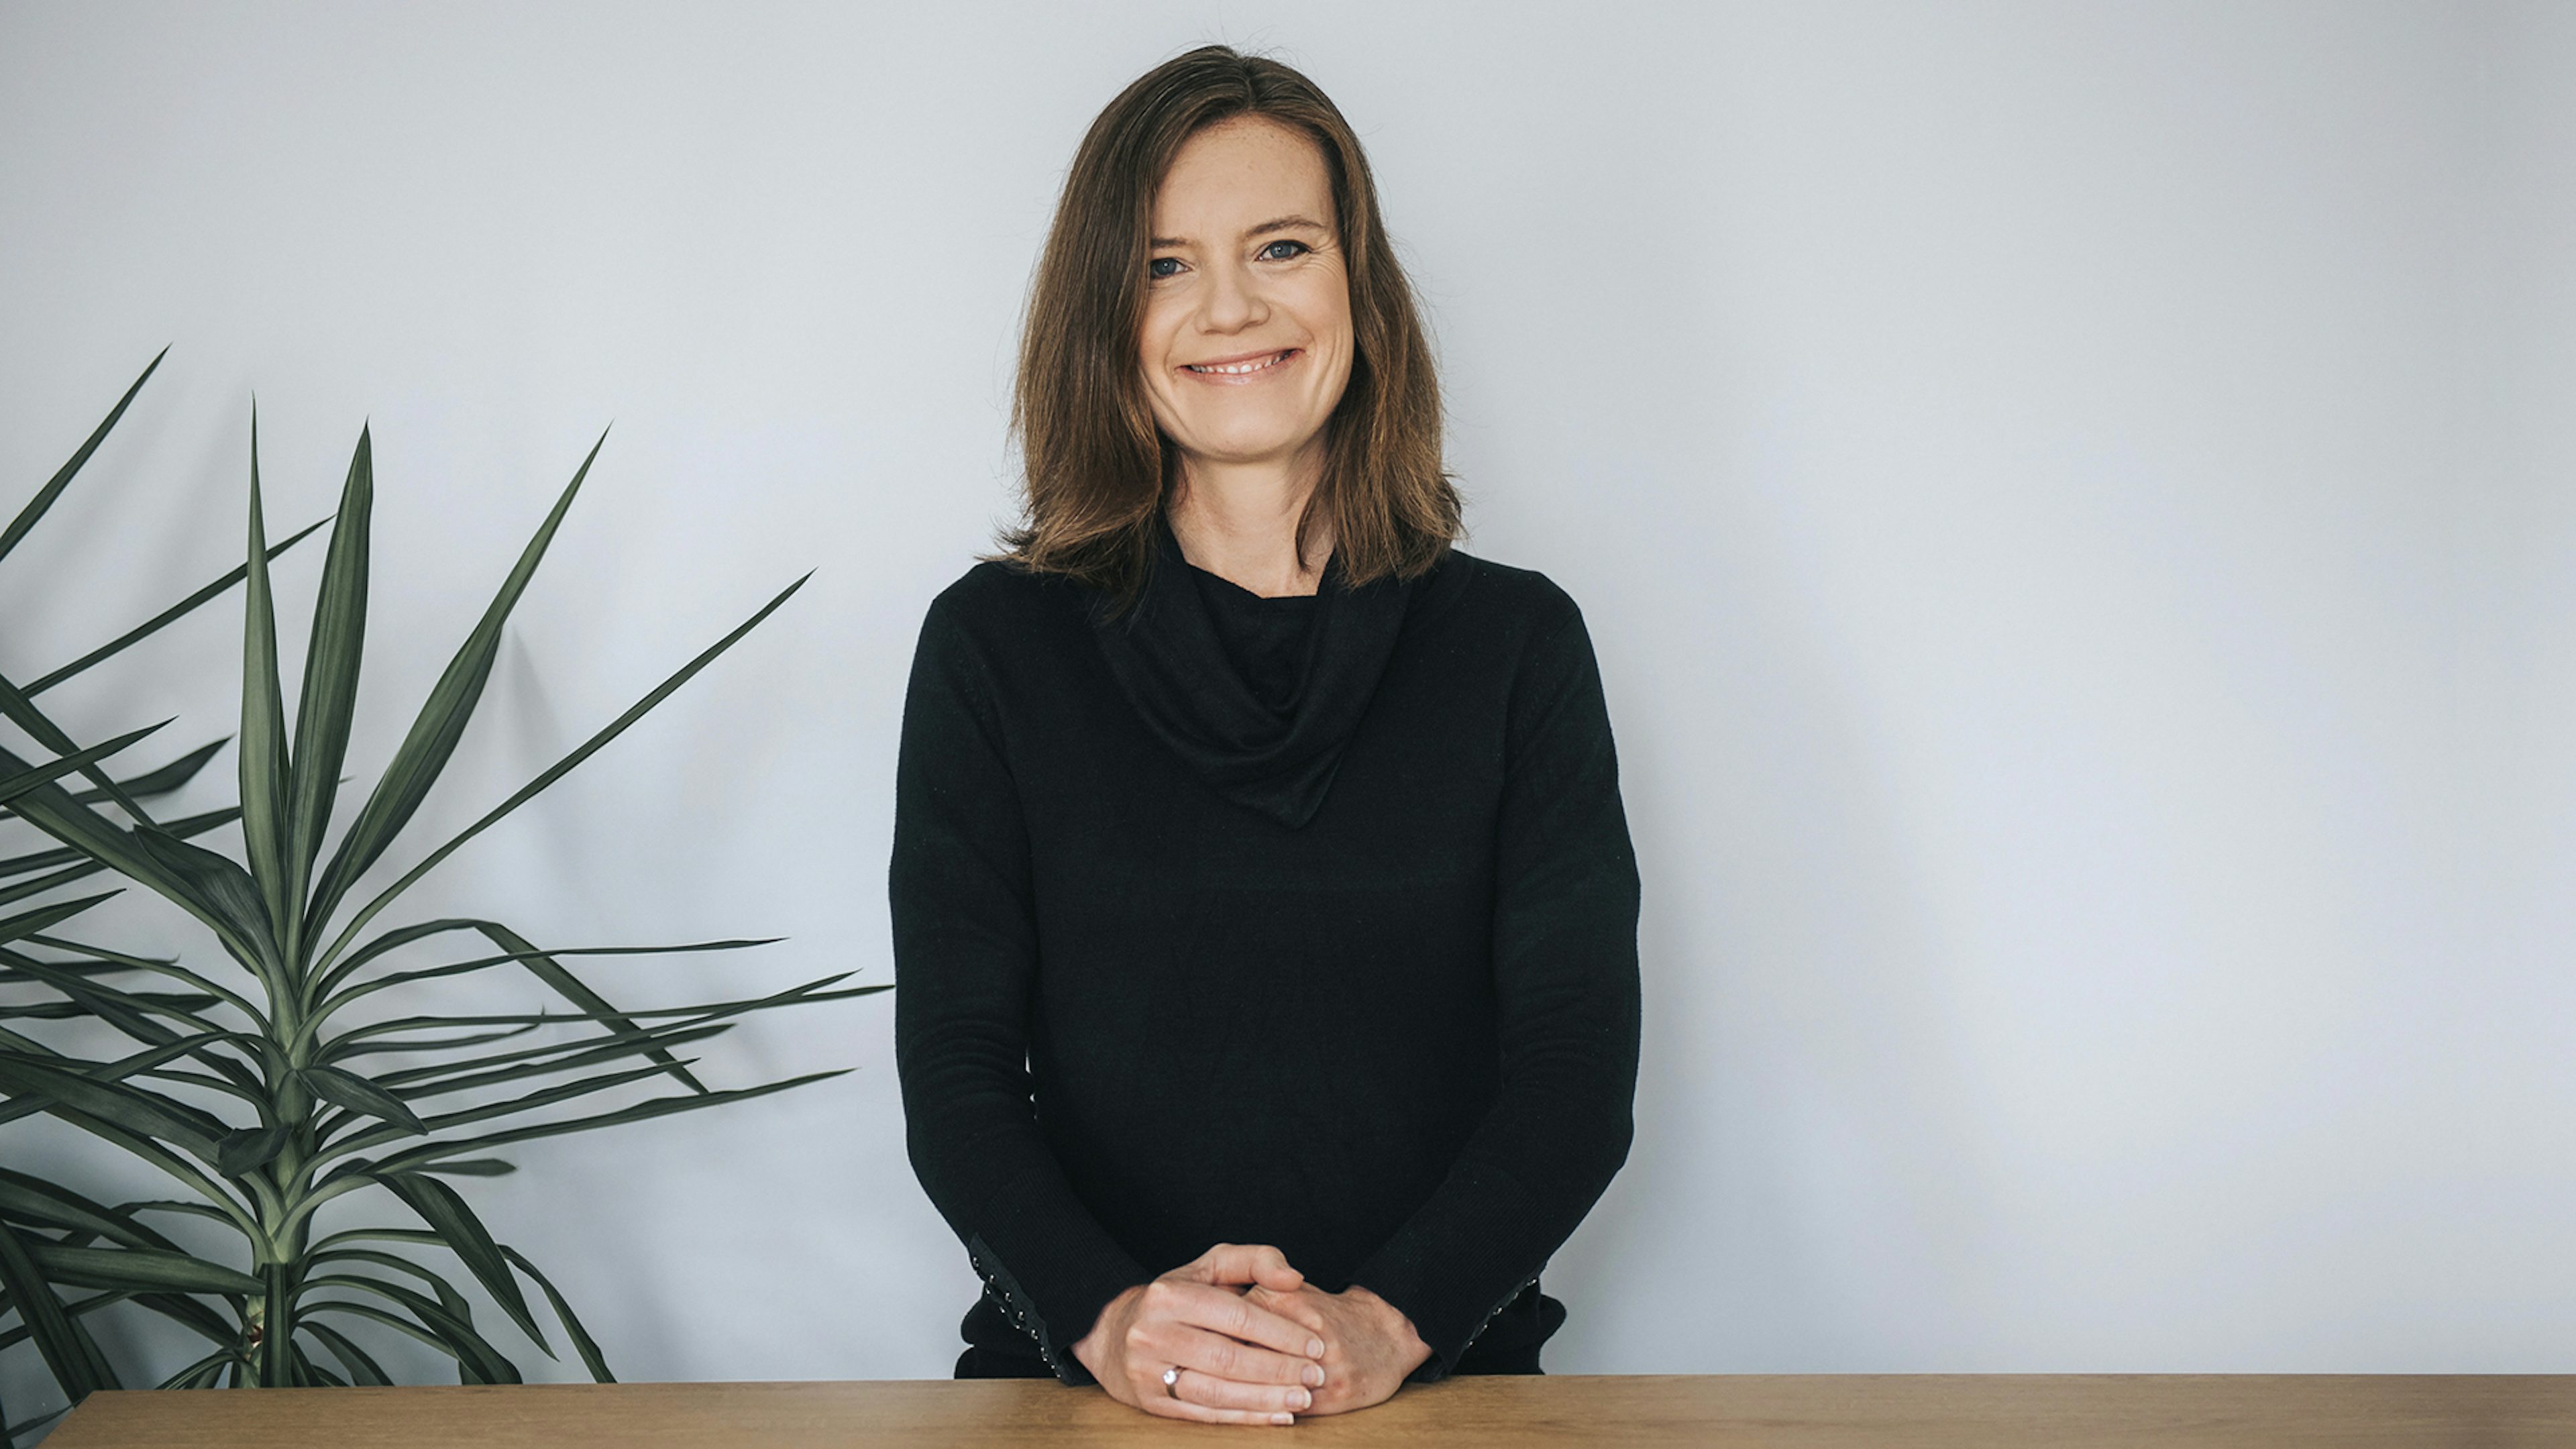 Caroline Mogford joins Veriff as Chief Marketing Officer